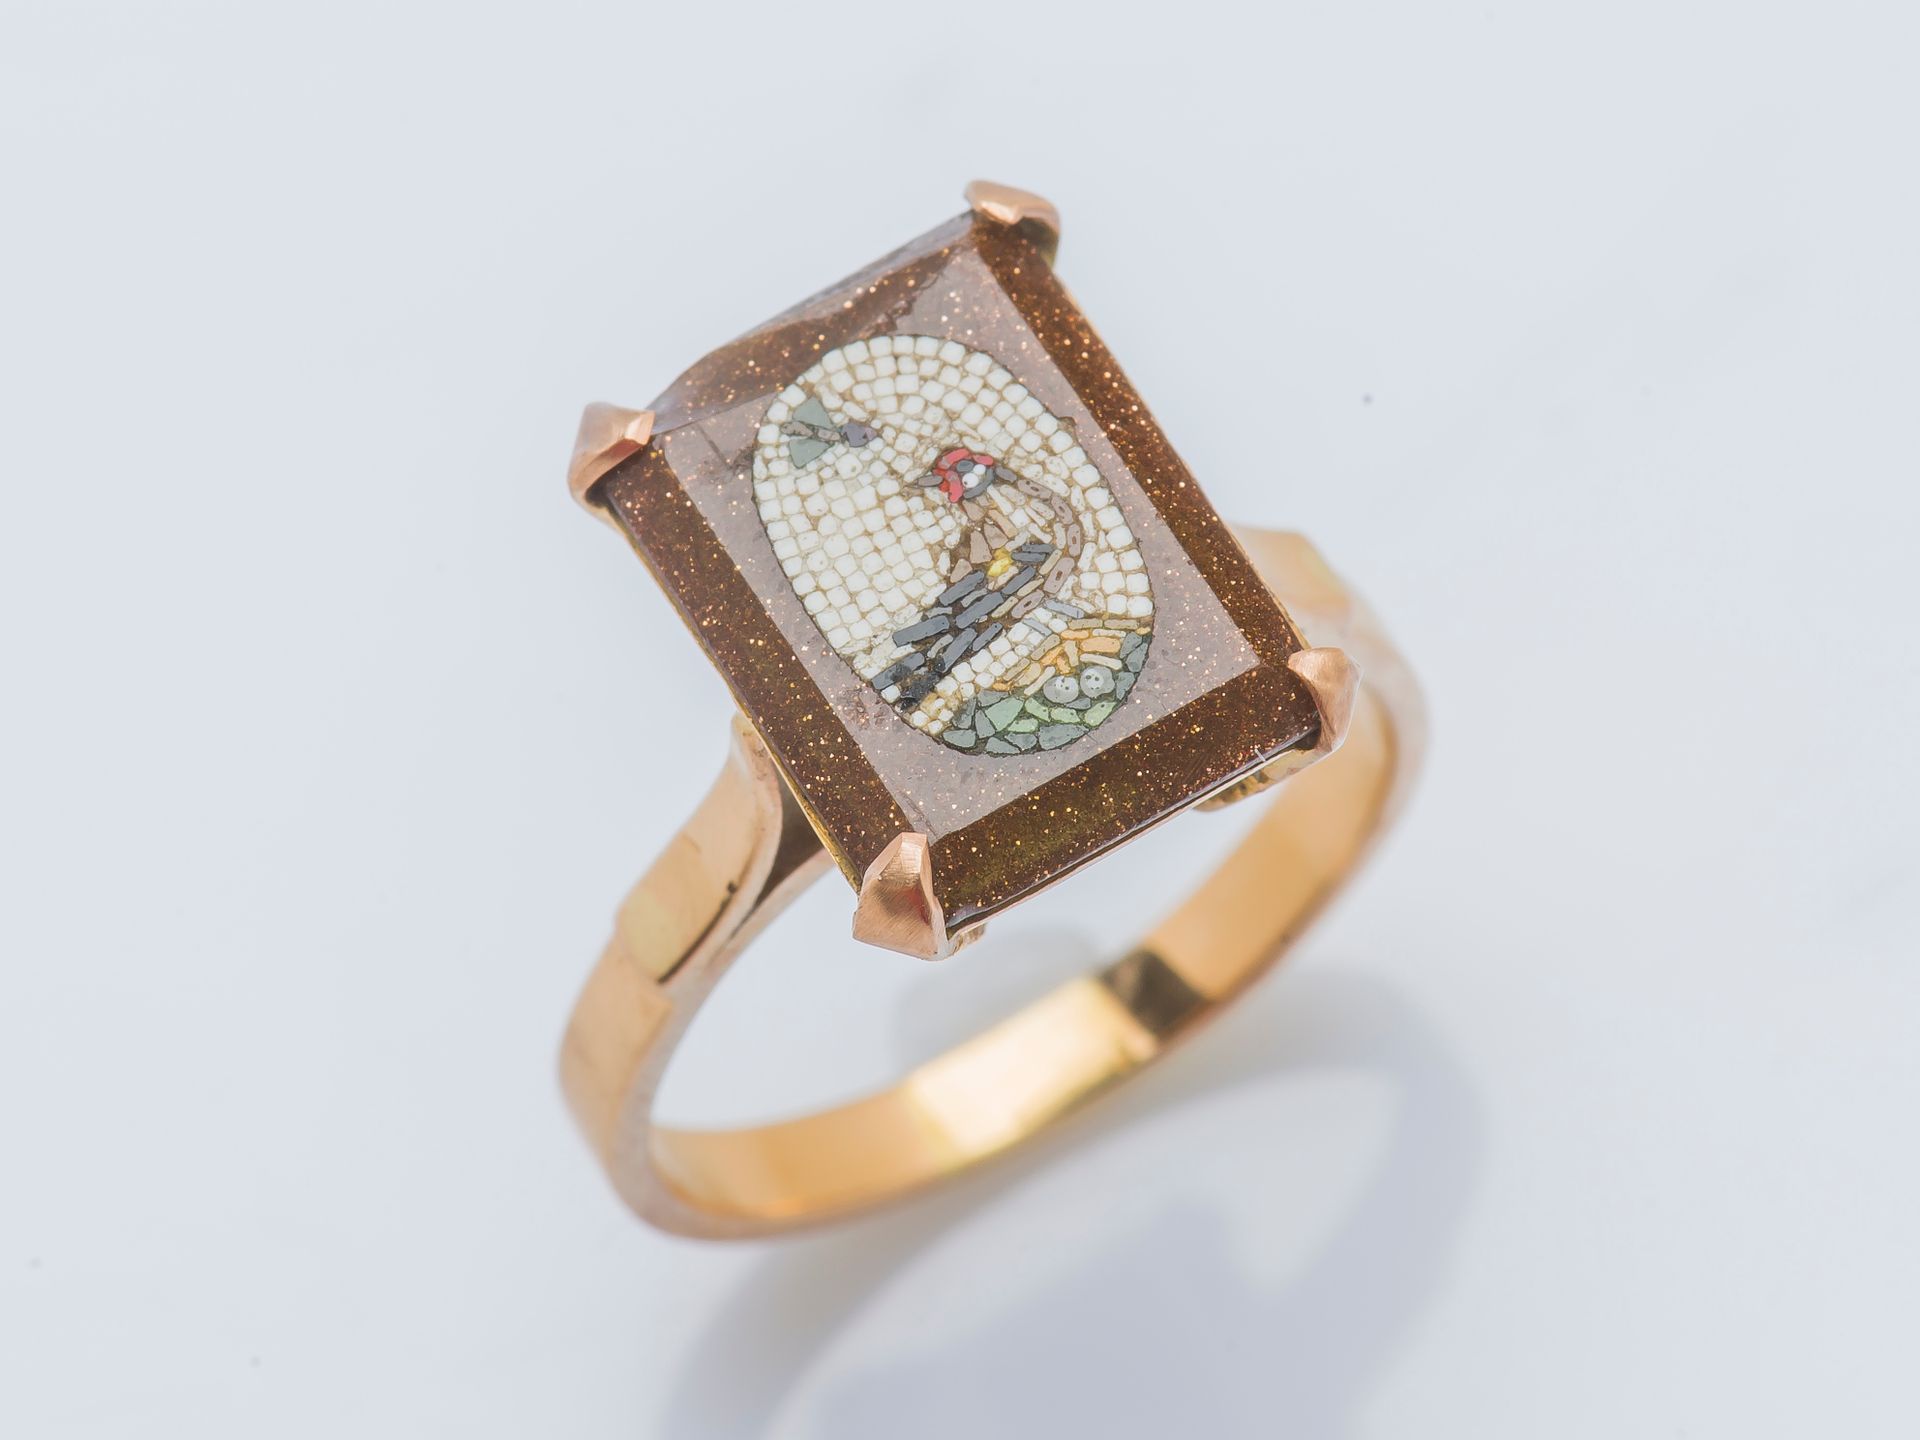 Null 18K (750 ‰) yellow gold ring adorned with a rectangular micro-mosaic depict&hellip;